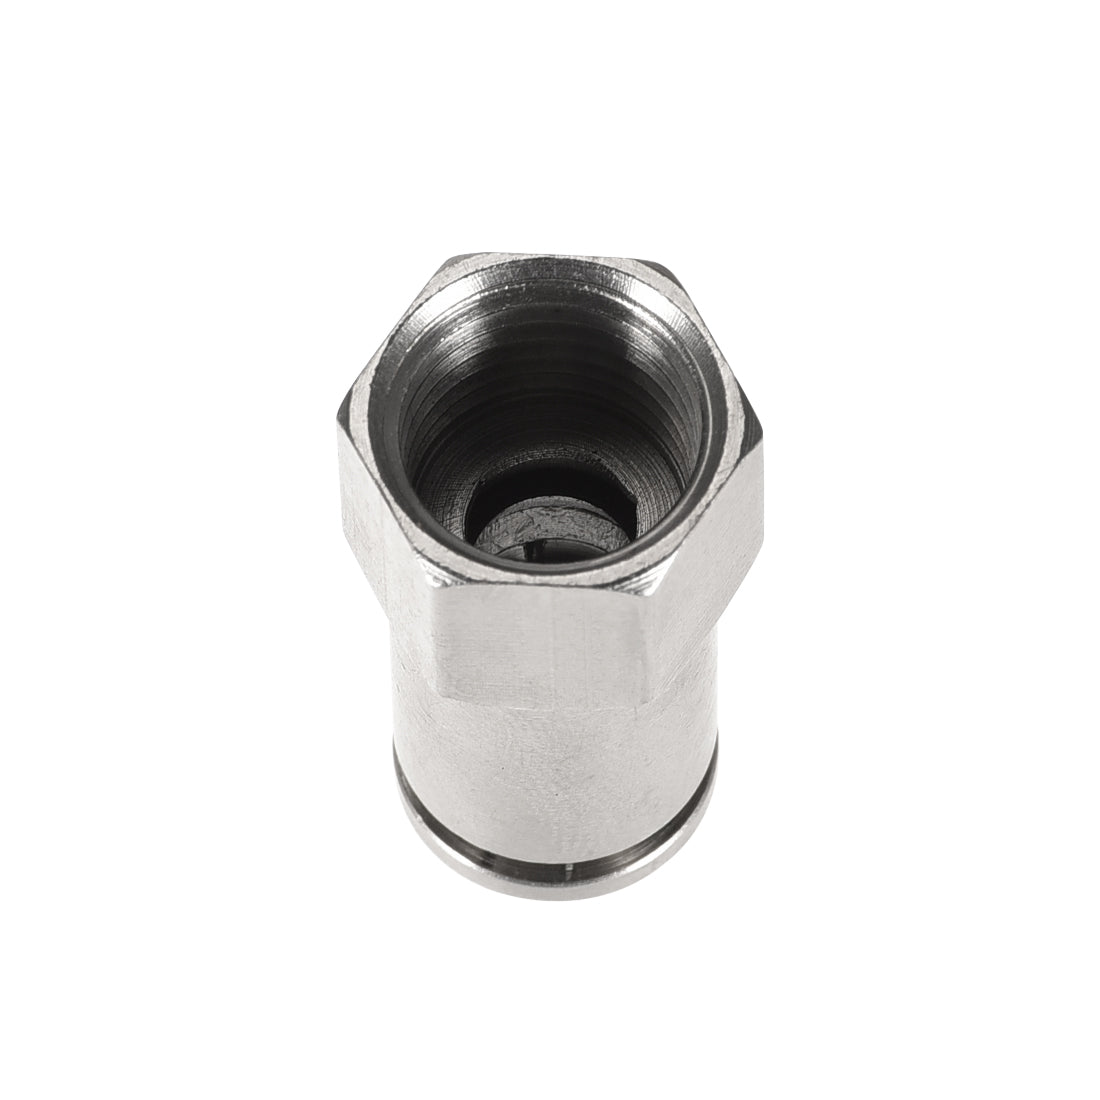 uxcell Uxcell Push to Connect Tube Fittings 8mm Tube OD x 1/4 PT Female Silver Tone 2Pcs